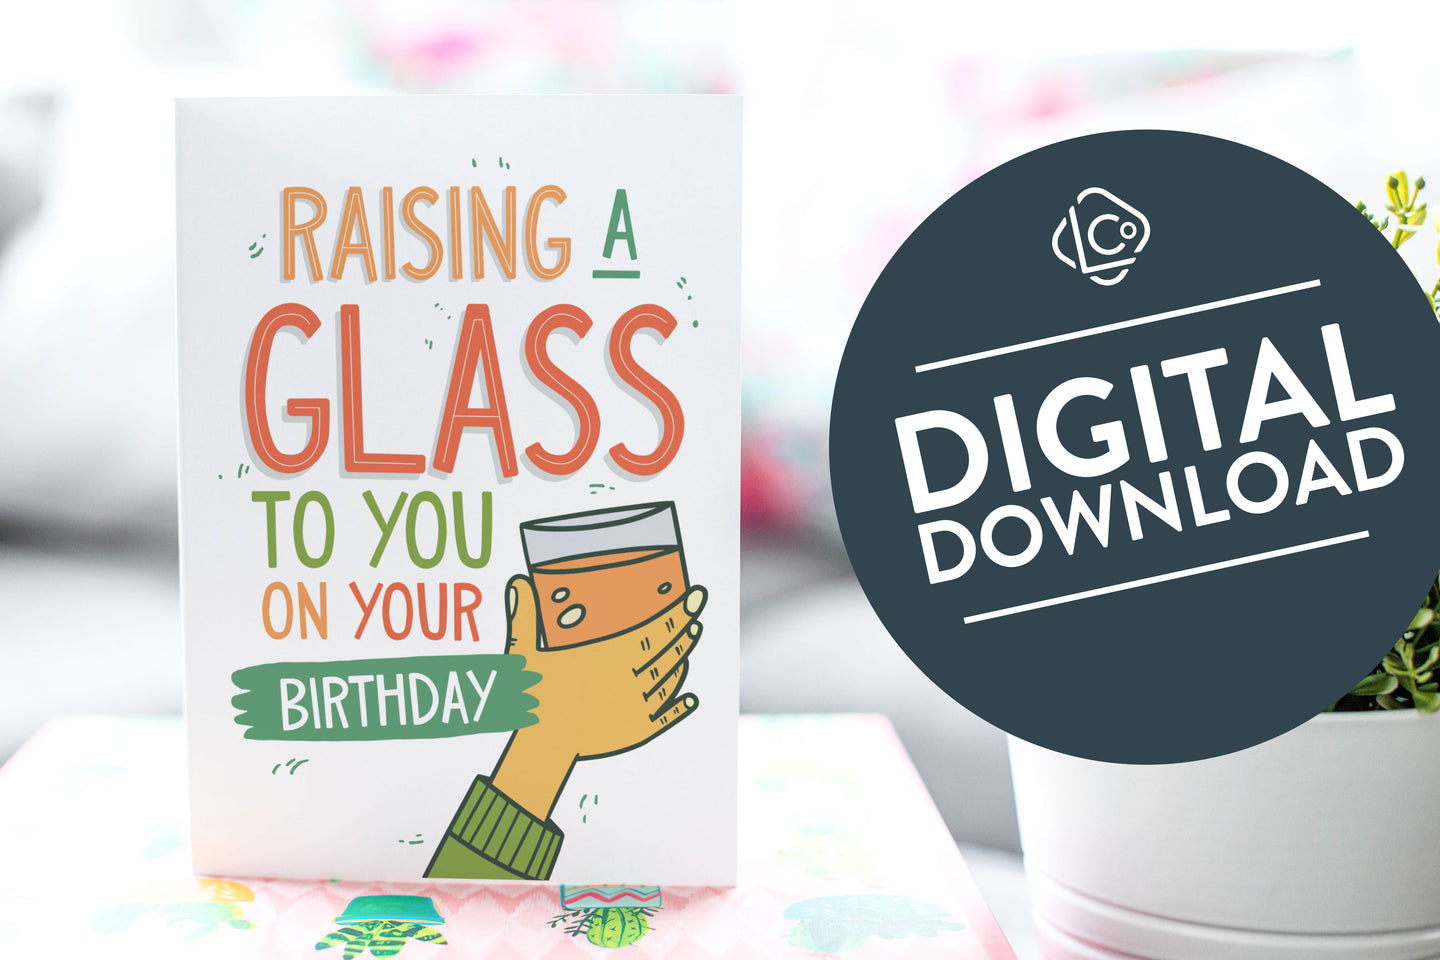 A greeting card is on a table top with a gift in pink wrapping paper. Next to the gift is a white plant pot with a green plant. The card features the words Raising a glass to you on your birthday” with an illustrated hand raising a glass. The words 